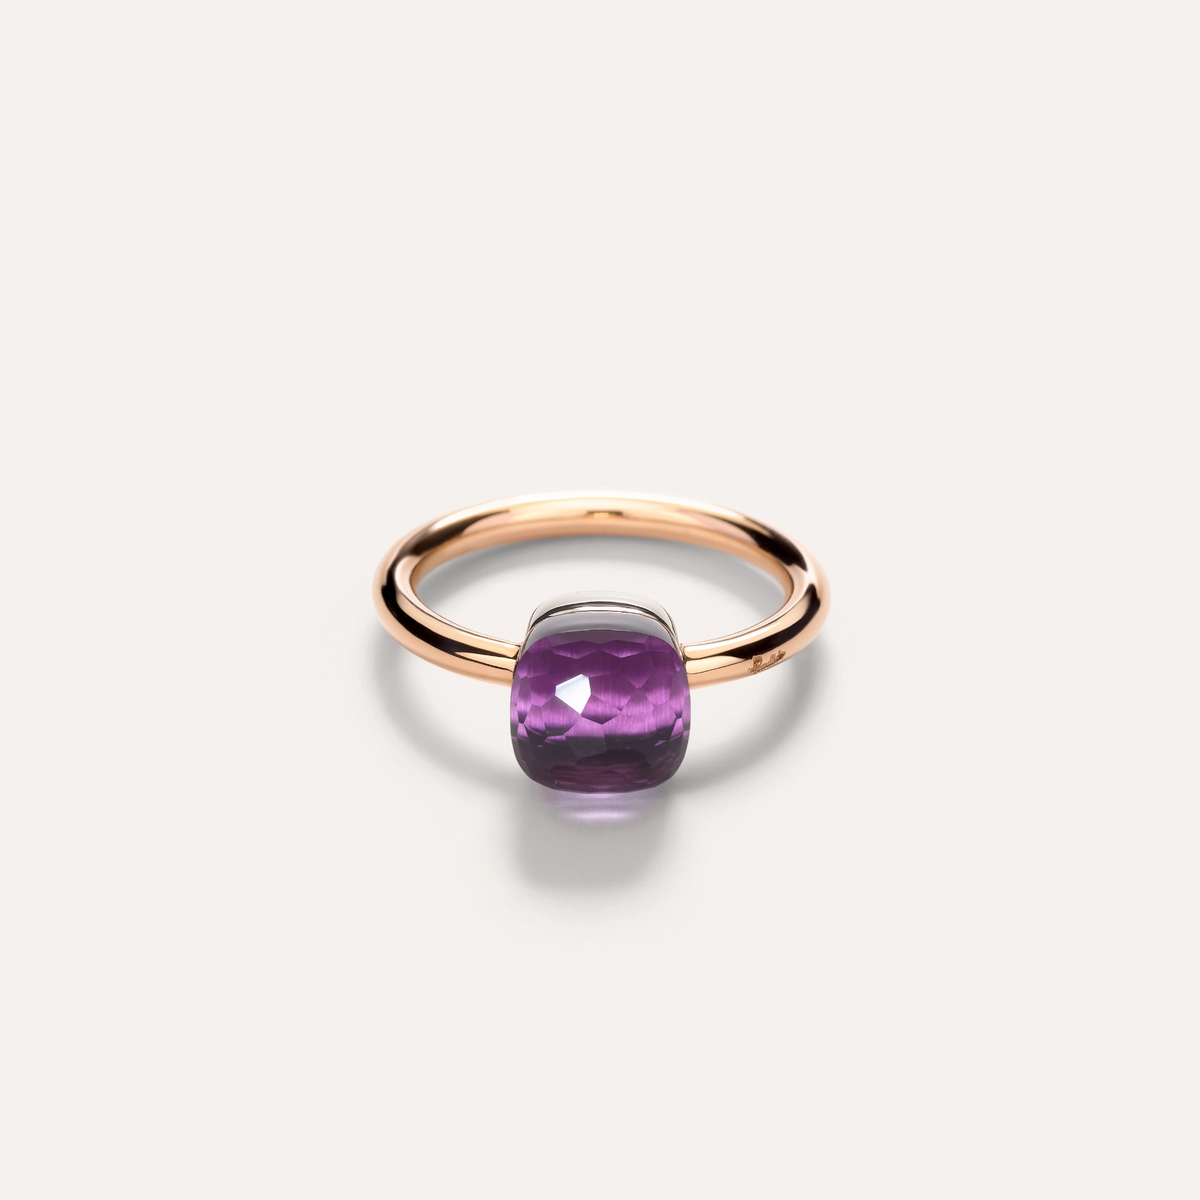 Pomellato Nudo Petit Ring with Amethyst in 18k Gold